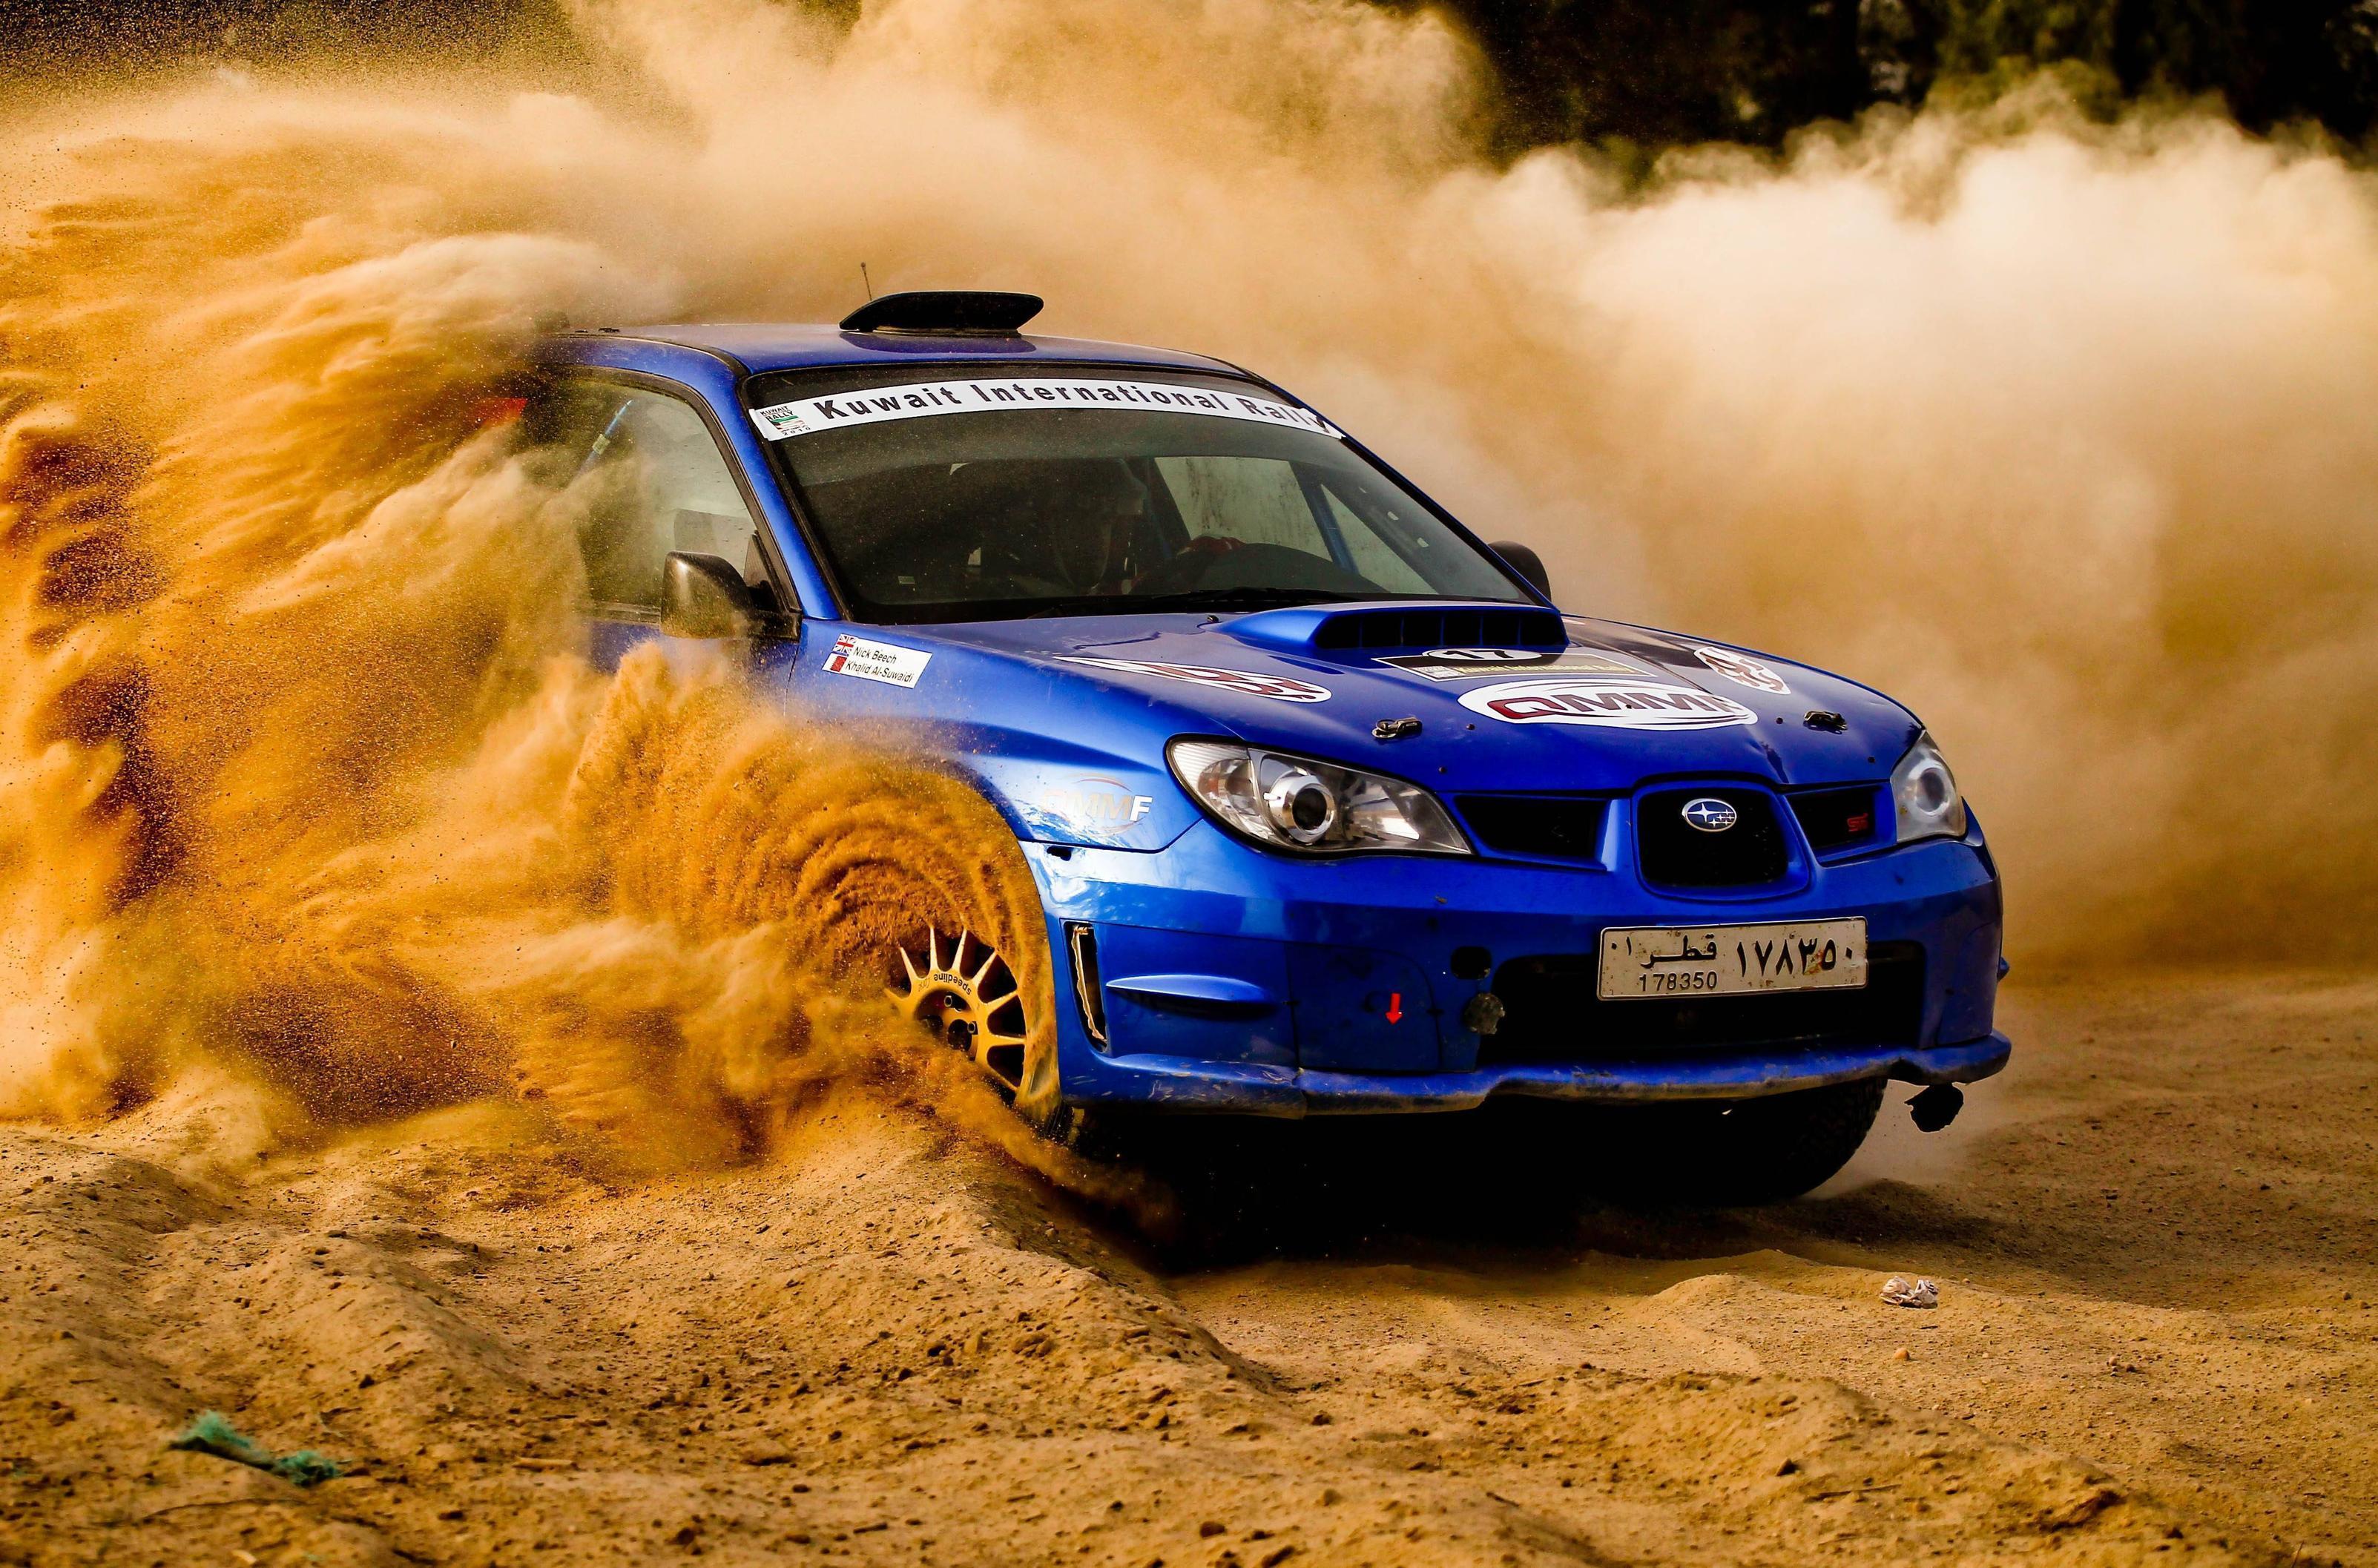 Gallery For Gt Rally Car Racing Wallpaper